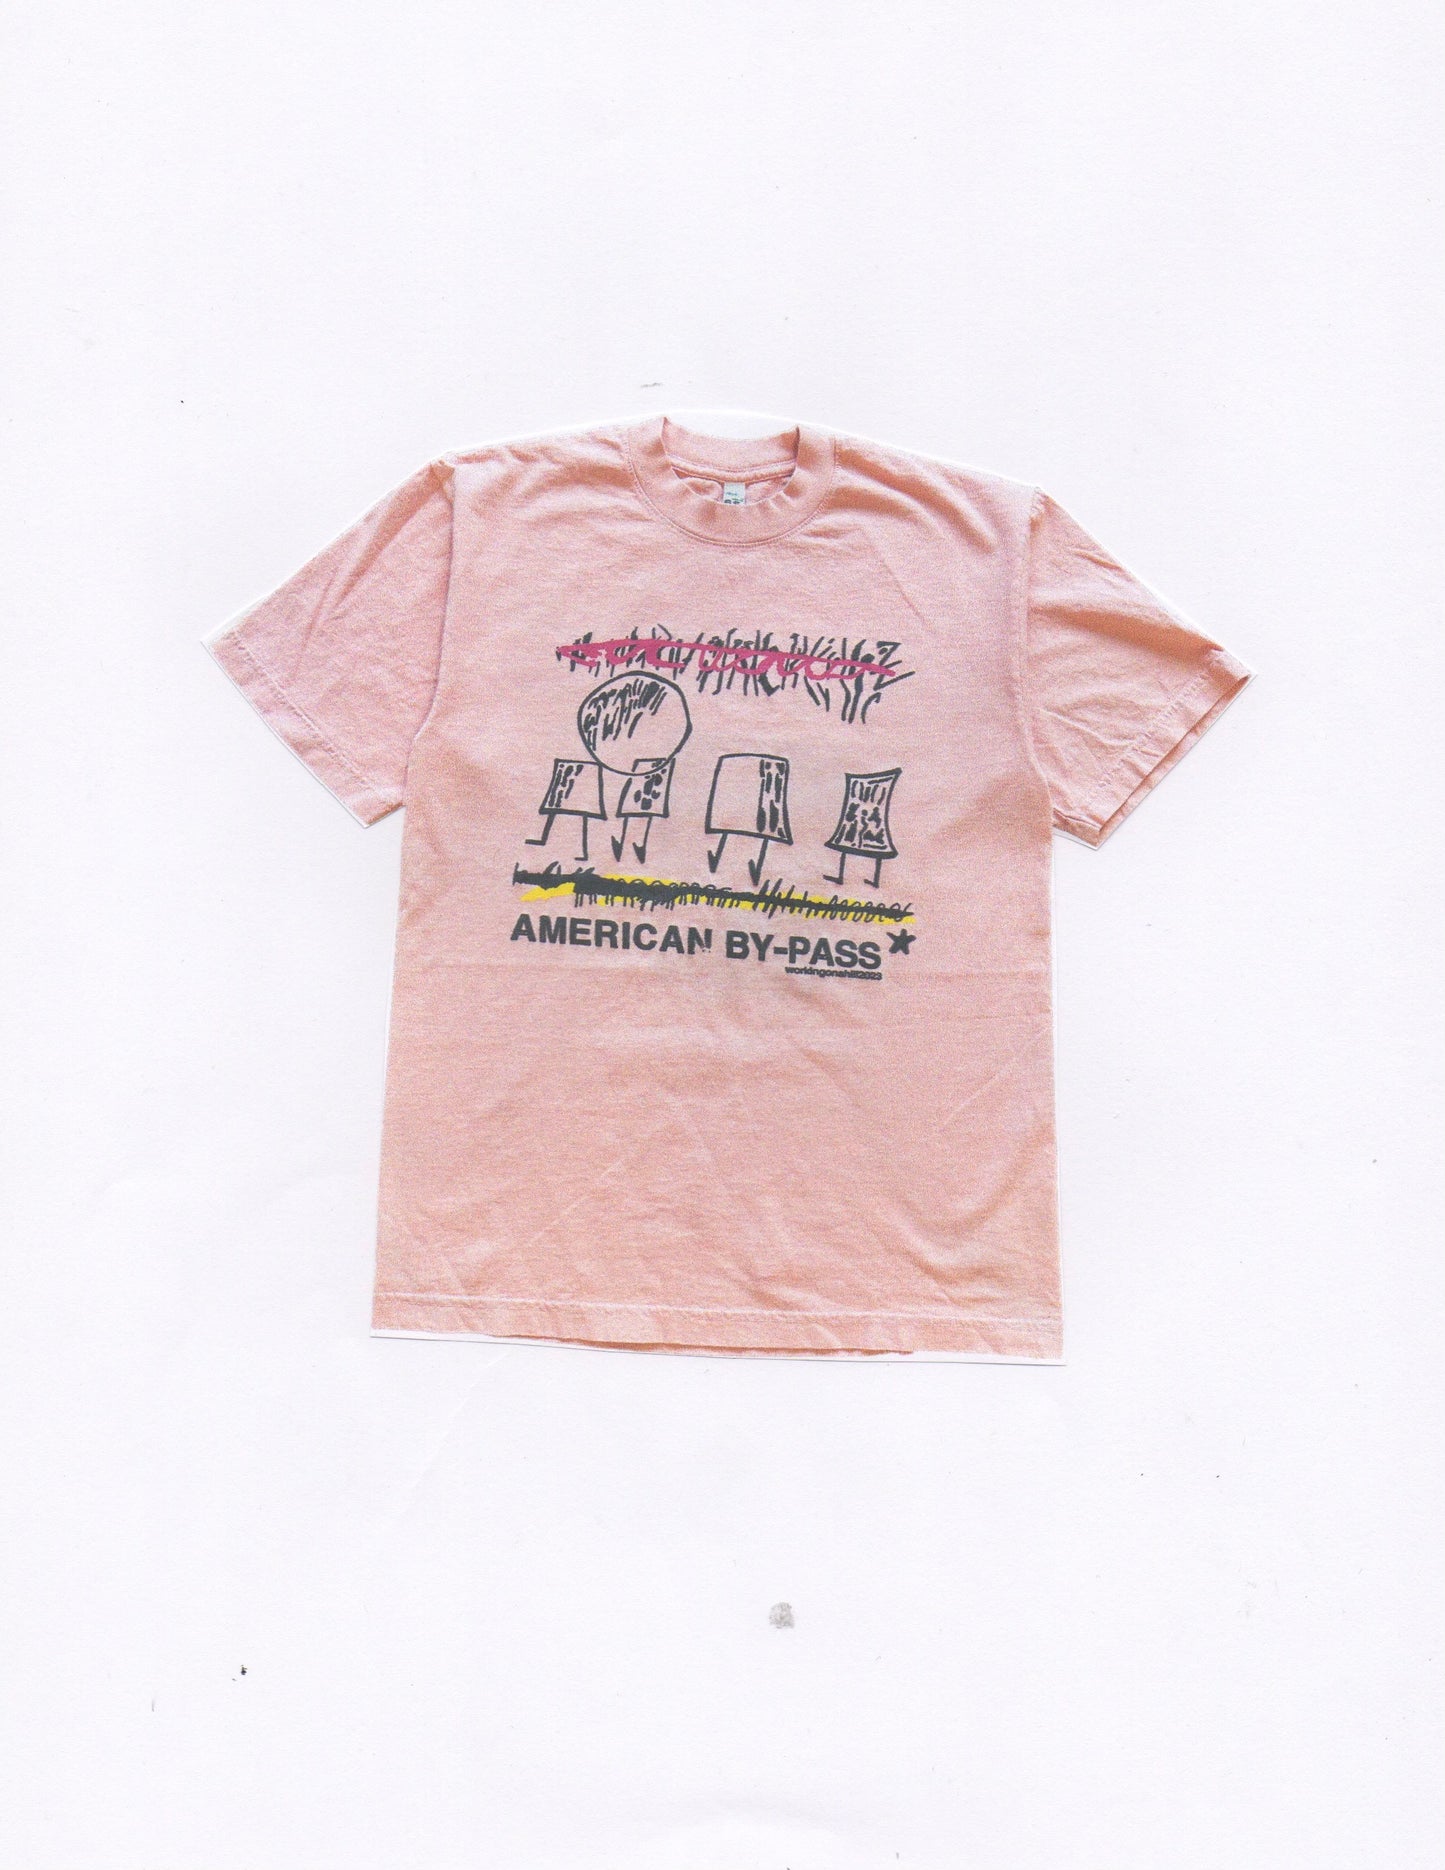 American BY-PASS* Tee